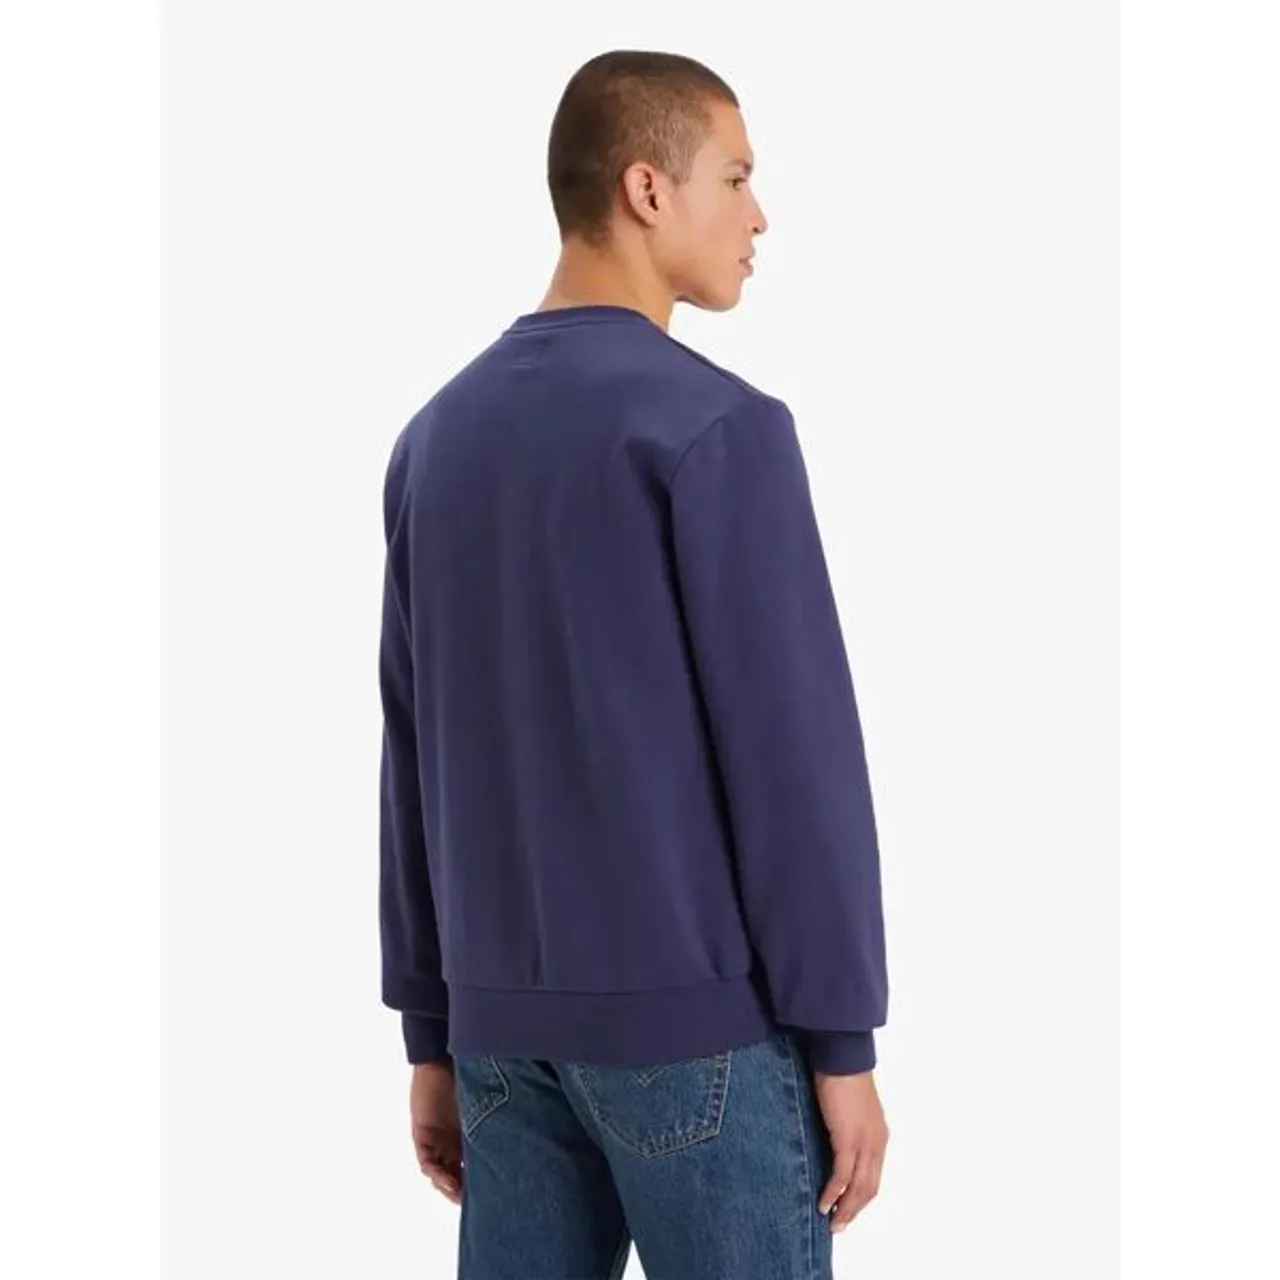 Levi's Fit Graphic Jumper, Navy - Navy - Male